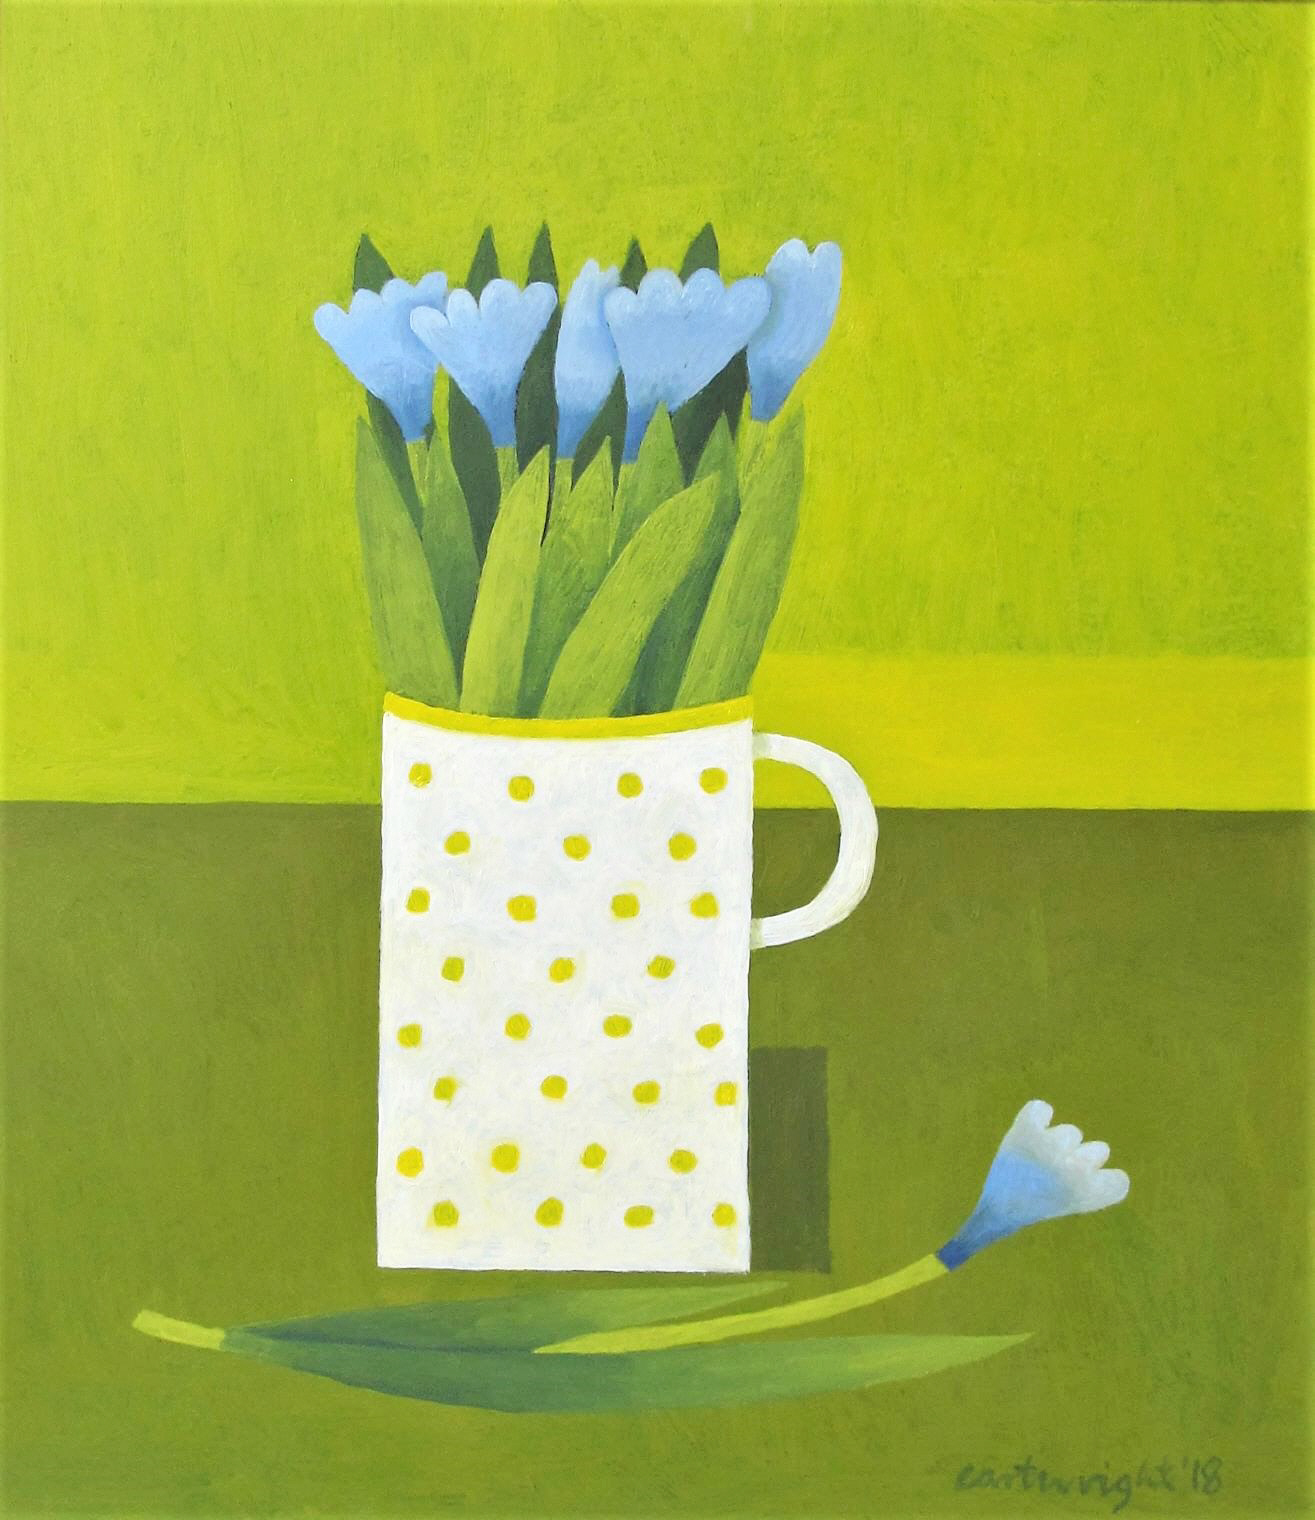 Blue flowers and yellow polka dot mug against a green background. Reg Cartwright oil painting 2020